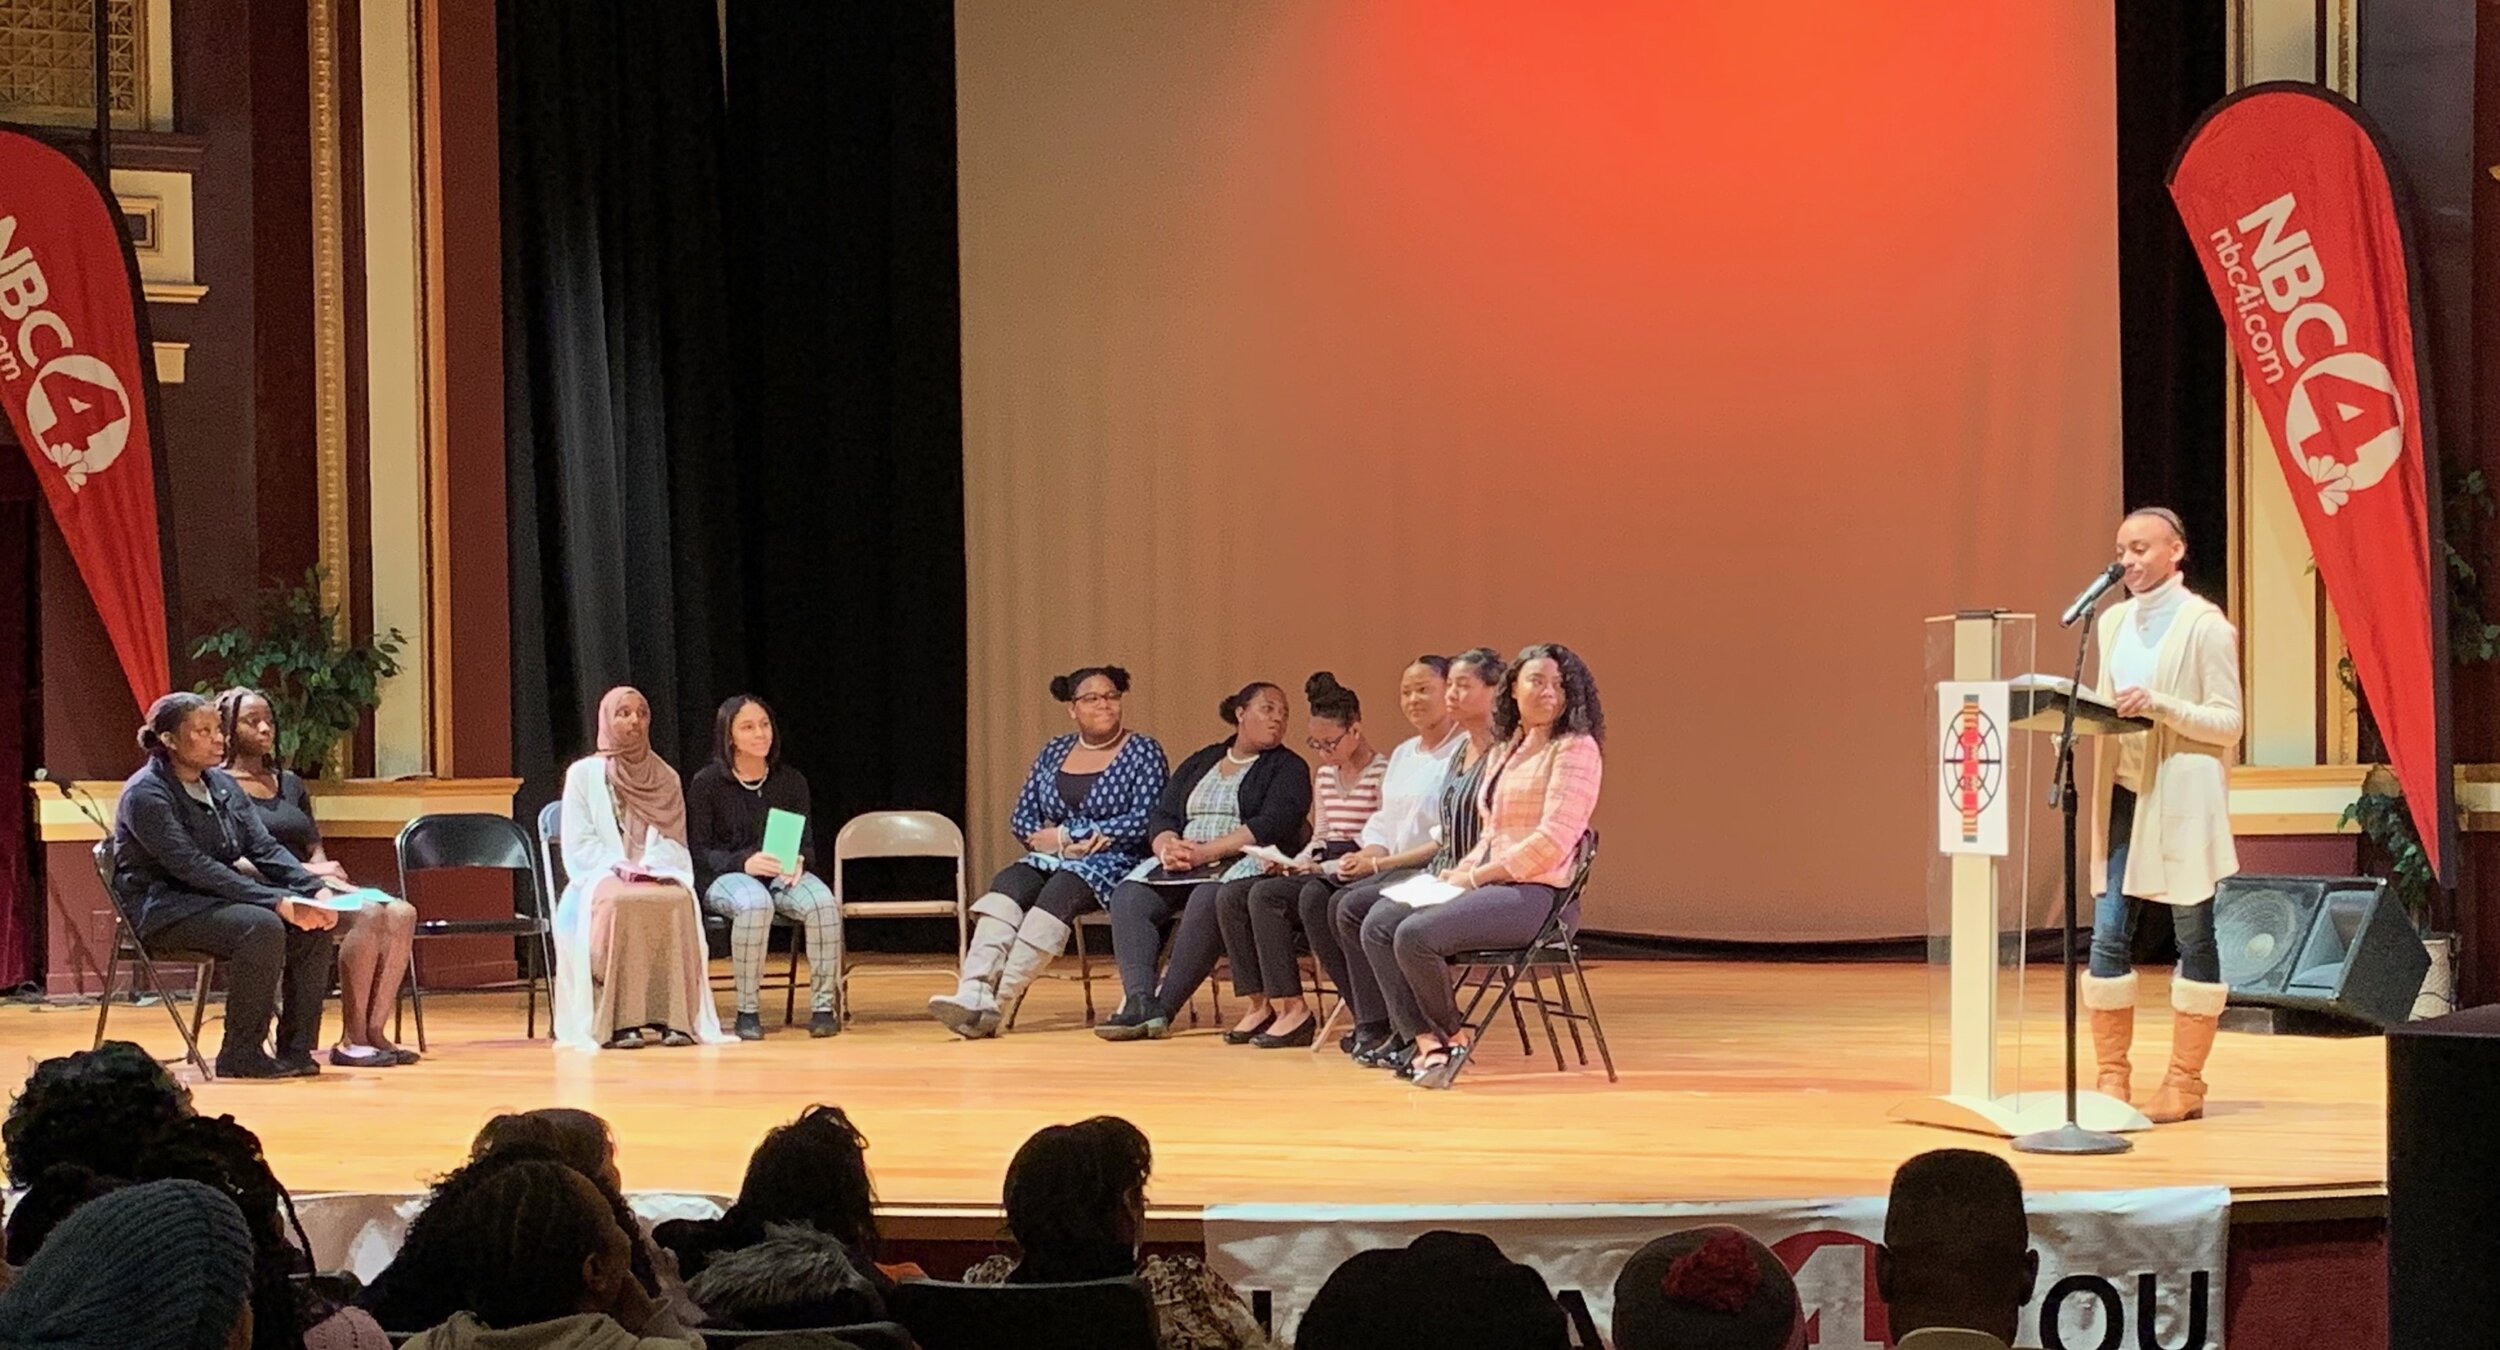  The girls were invited to share spoken word and poetry at the 2020 MLK, JR event at the King Complex in January. They performed in an exceptional way for an audience of over 400 people.&nbsp; One of the girls, Kelli Shivers received a standing ovati